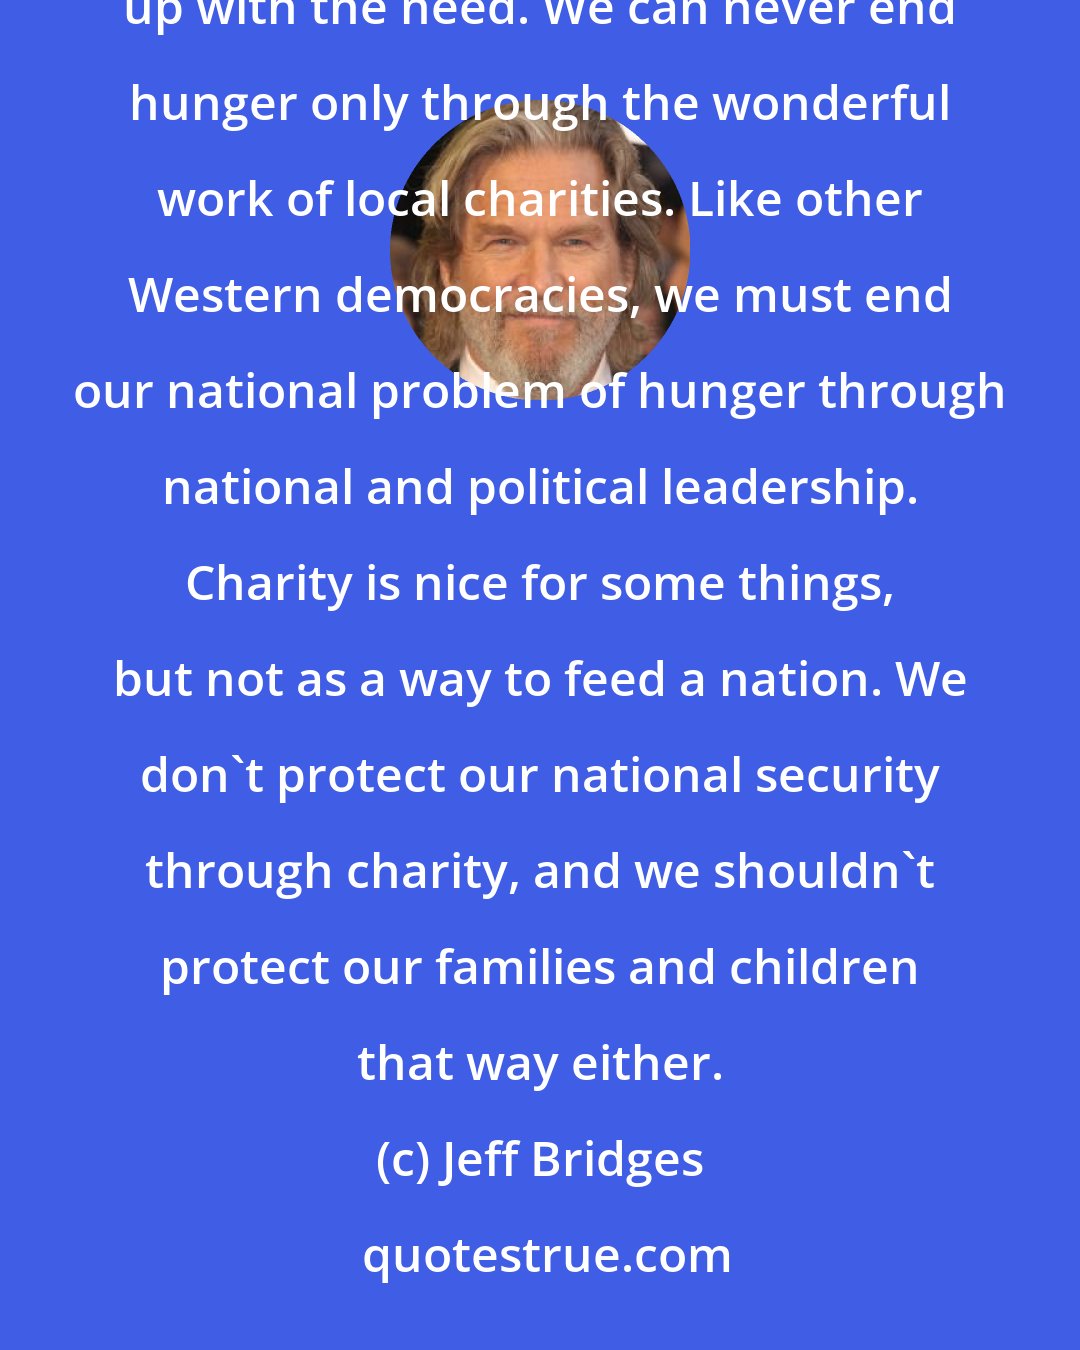 Jeff Bridges: Public charities, foodbanks and church pantries are doing more than ever before, but they can't keep up with the need. We can never end hunger only through the wonderful work of local charities. Like other Western democracies, we must end our national problem of hunger through national and political leadership. Charity is nice for some things, but not as a way to feed a nation. We don't protect our national security through charity, and we shouldn't protect our families and children that way either.